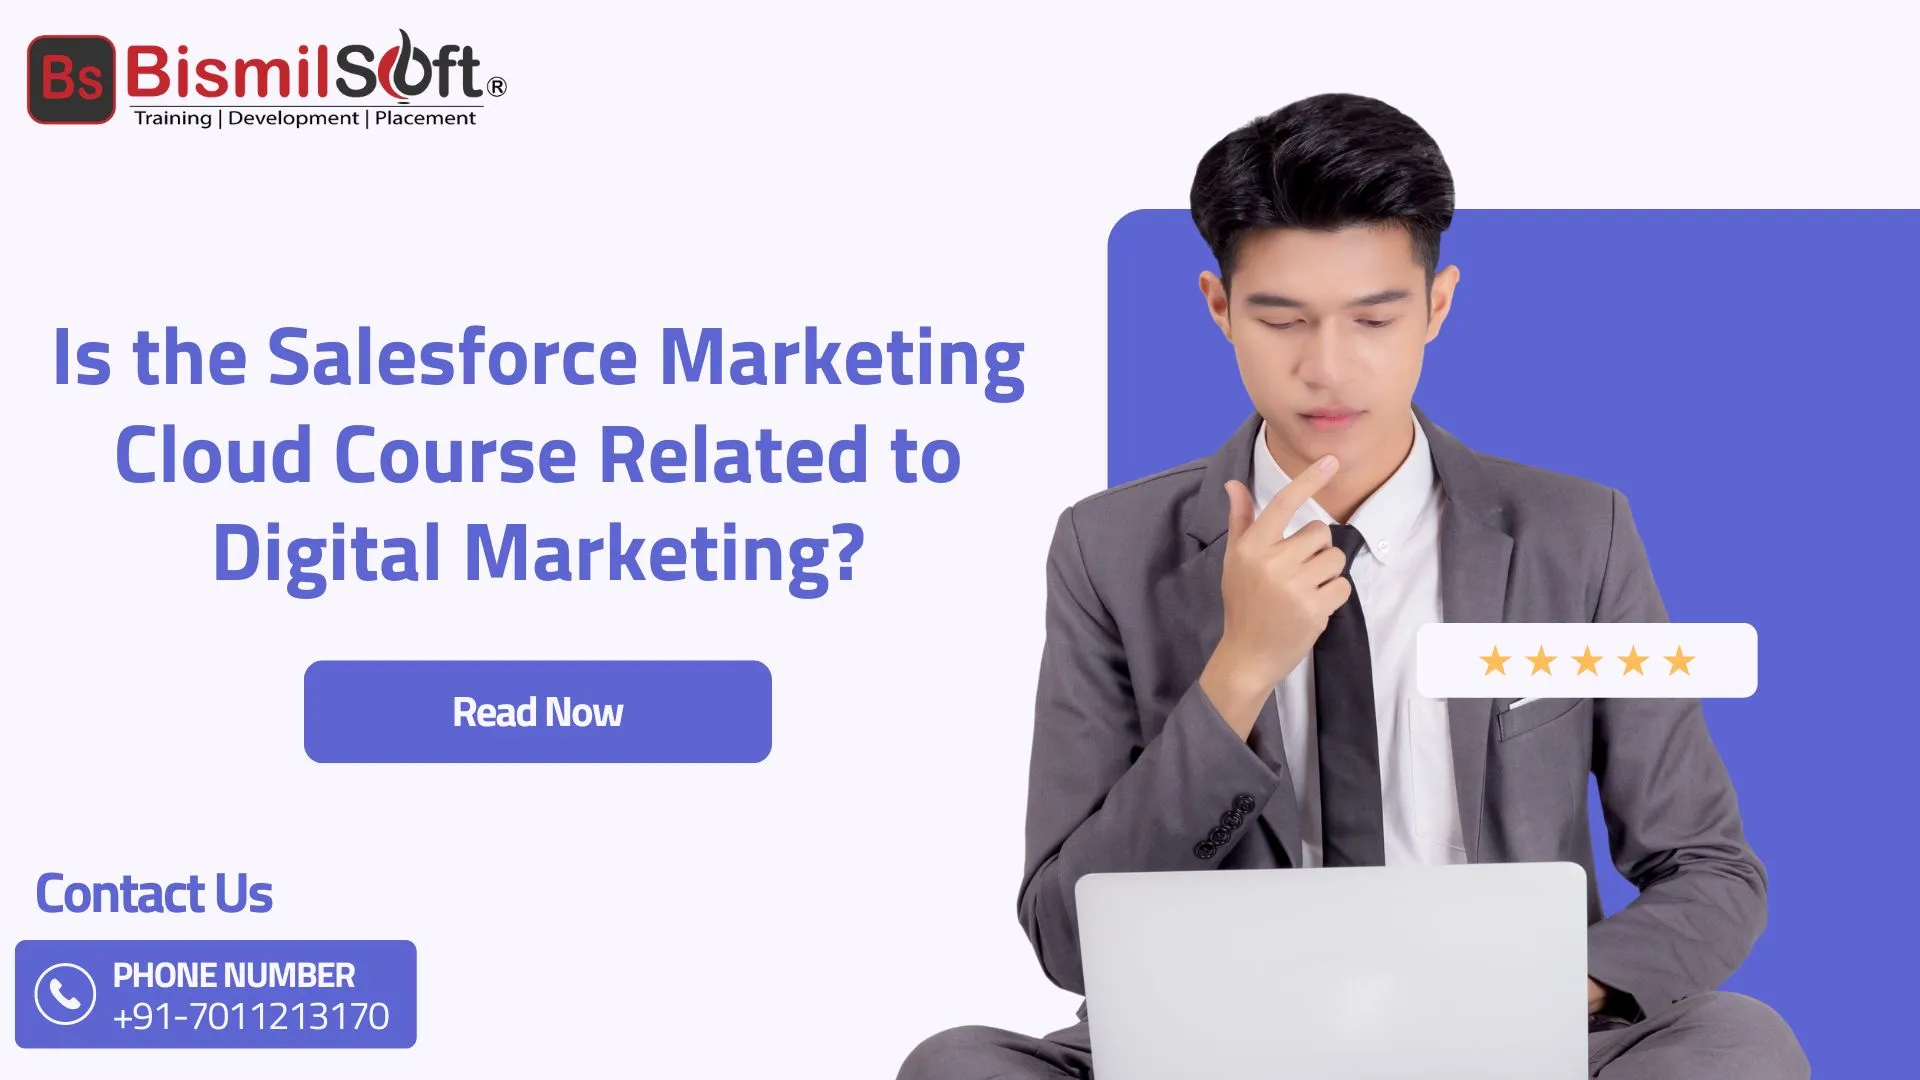 Is the Salesforce Marketing Cloud Course Related to Digital Marketing?